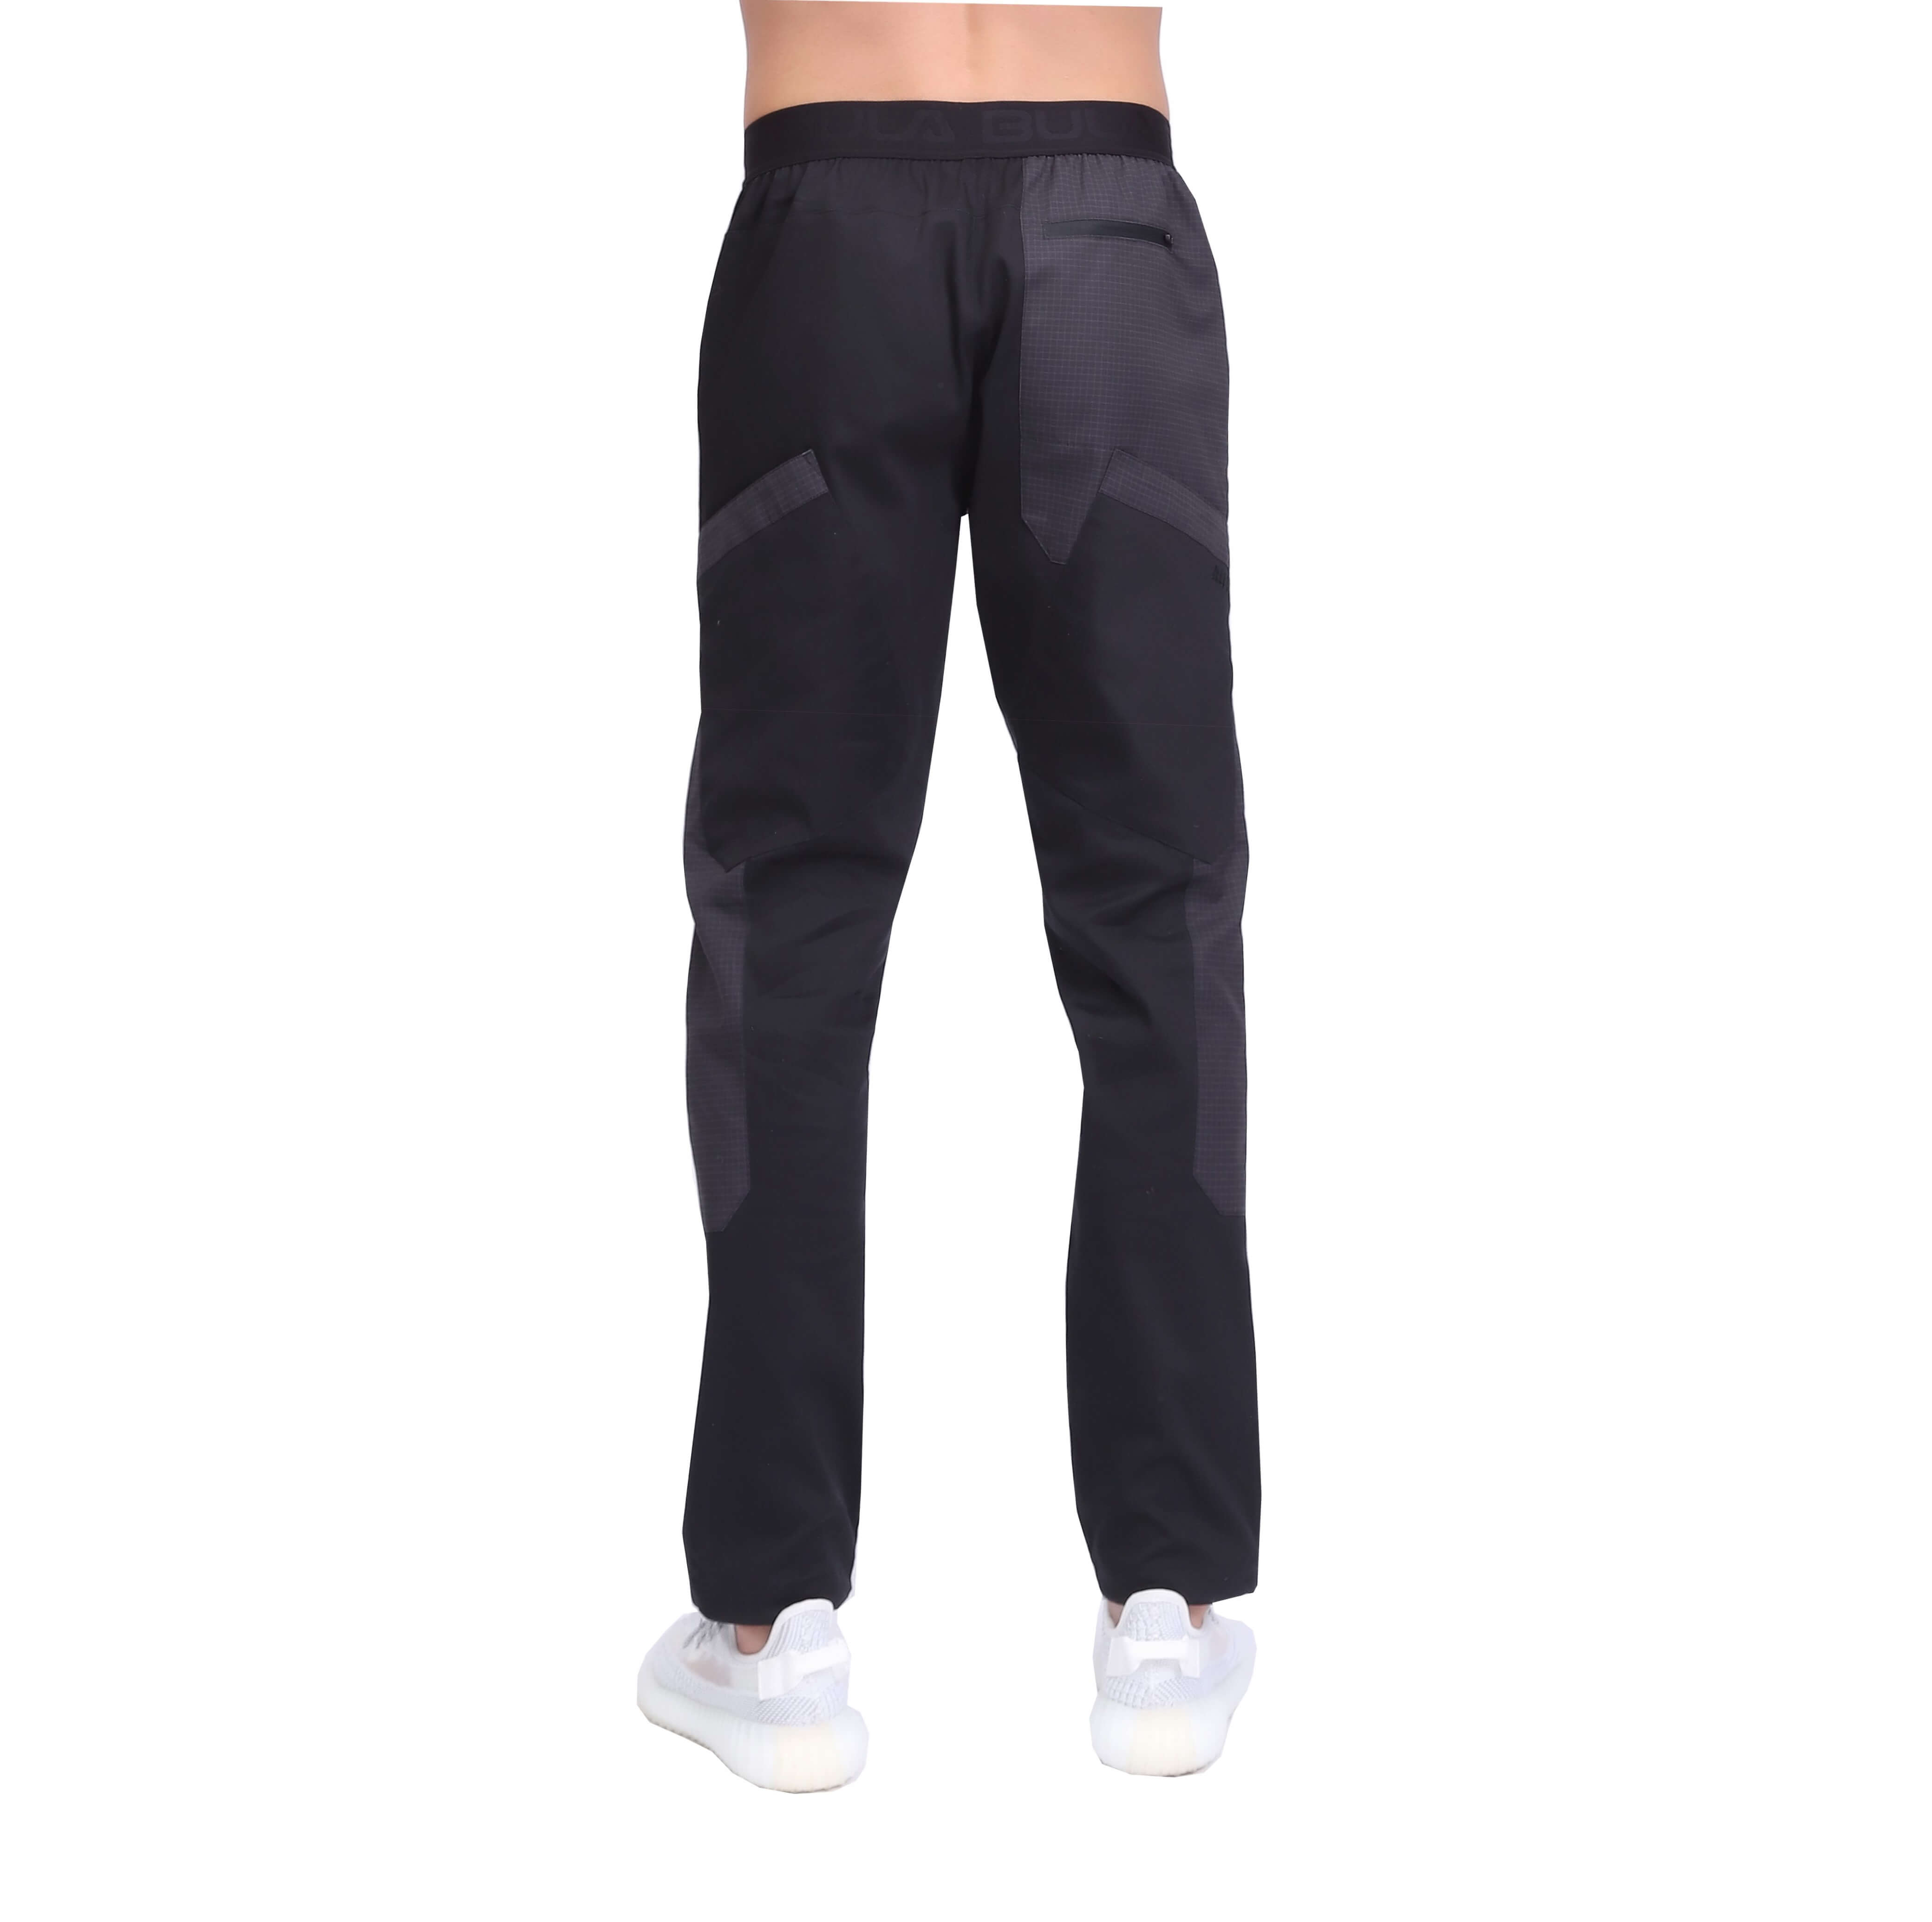 Men's Outdoor Breathable Hiking Walking Trousers 